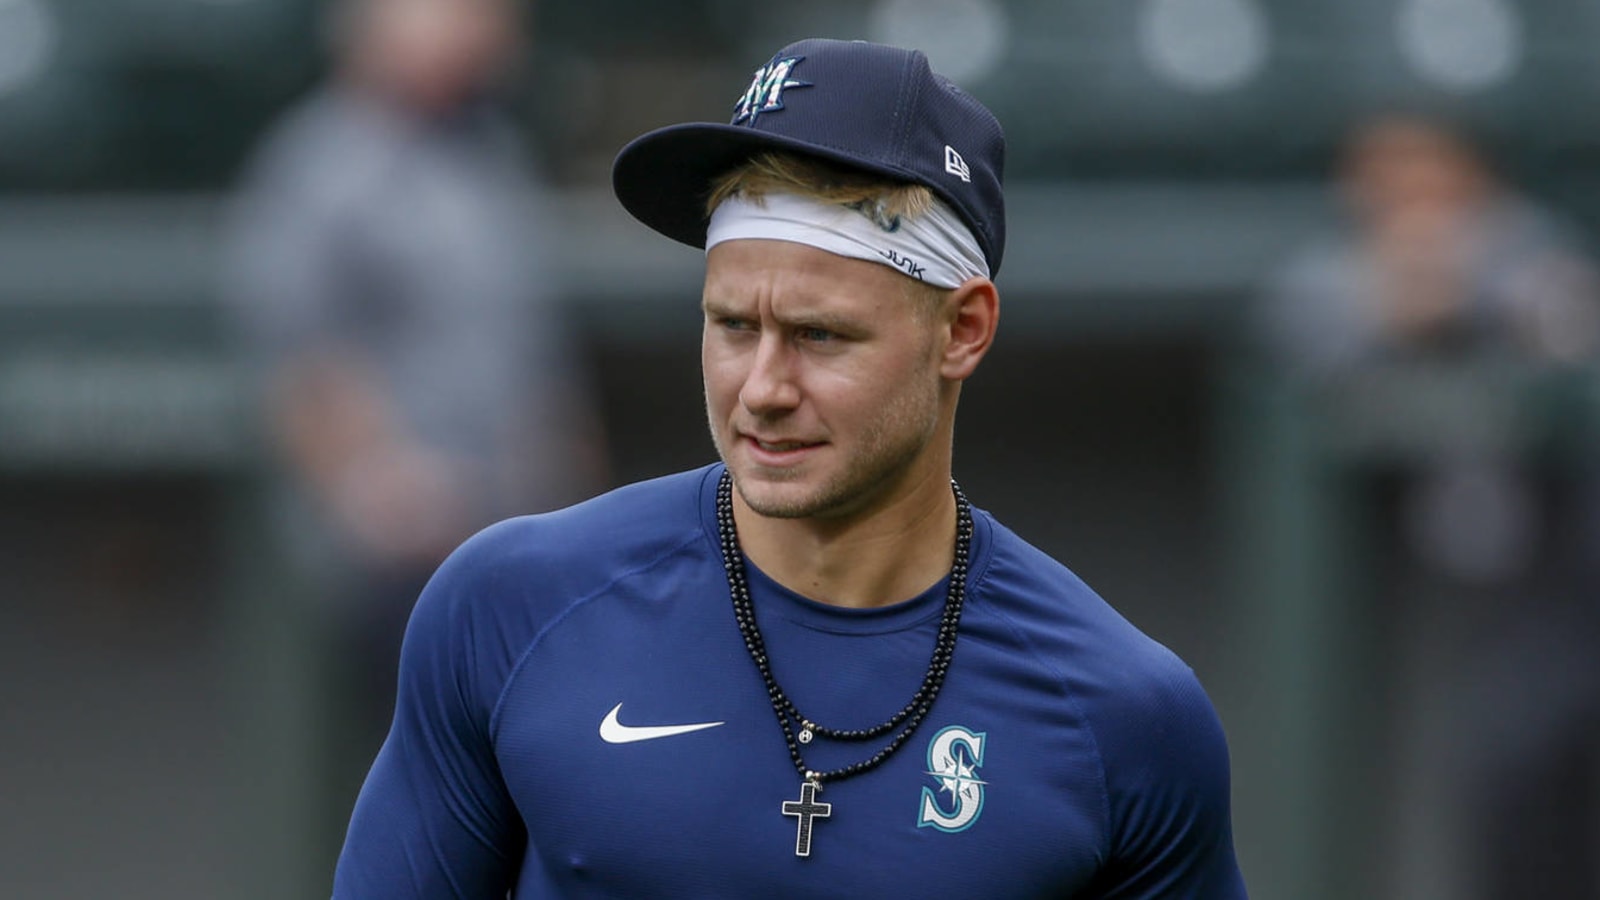 Mariners send top prospect Jarred Kelenic to minors